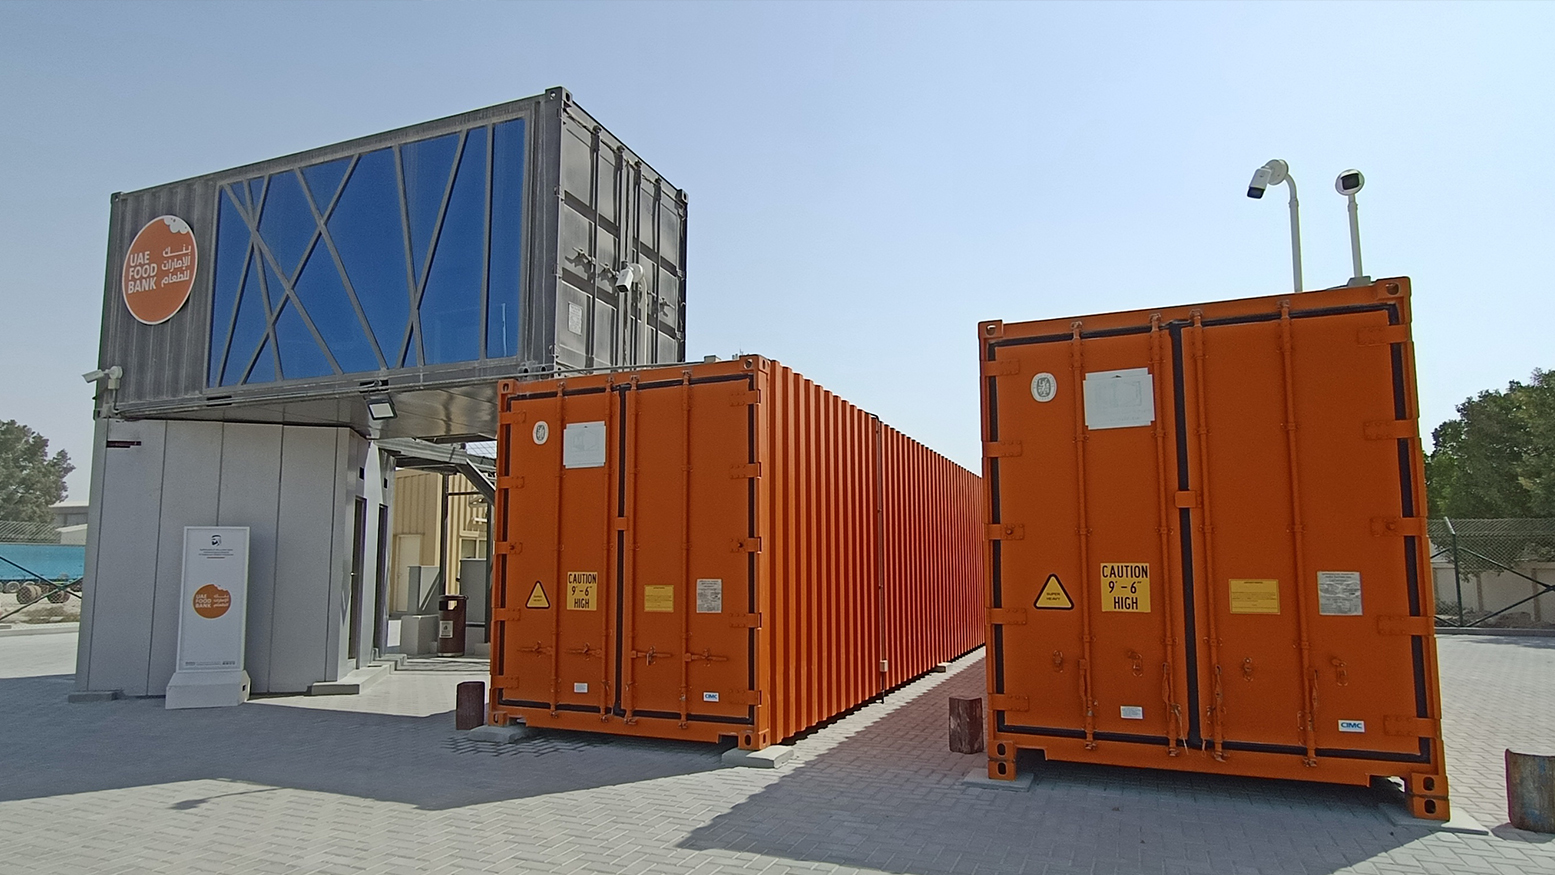 UAE Food bank containers